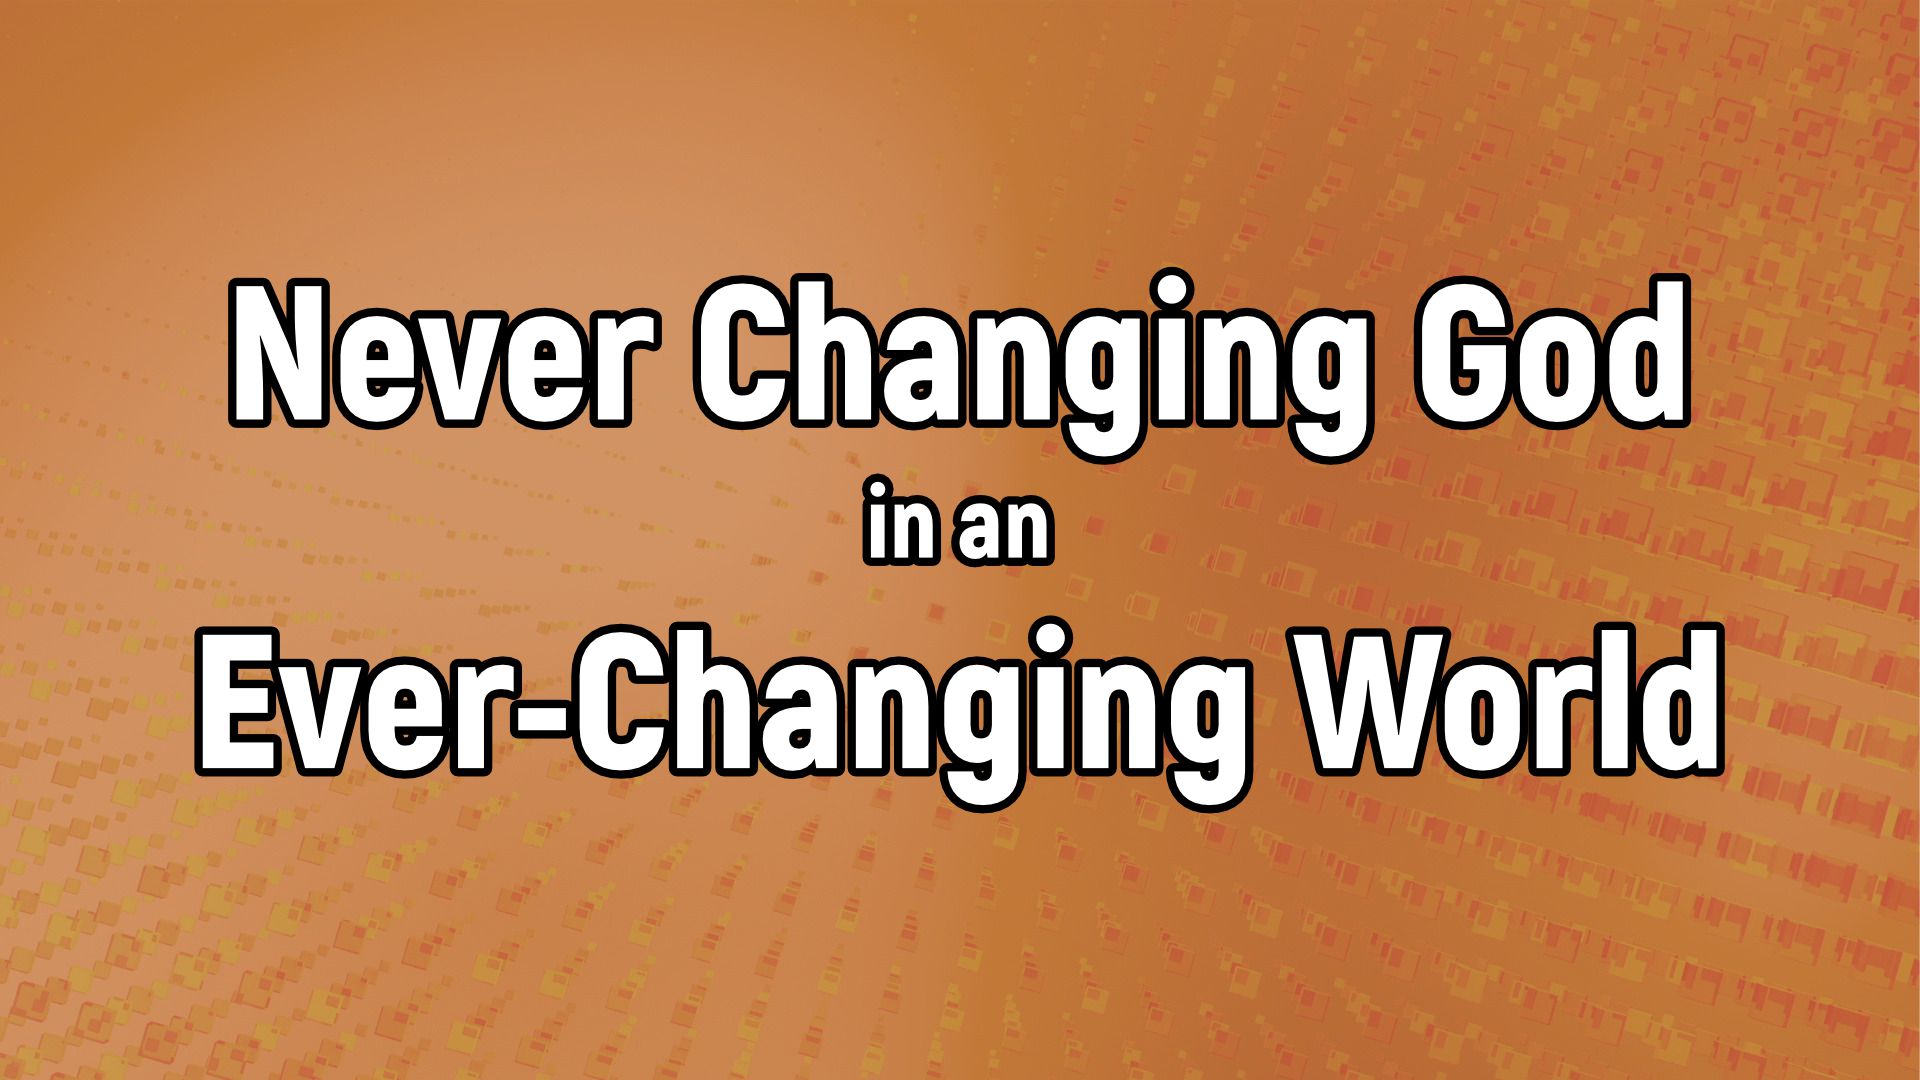 Never Changing God in an Ever-changing World